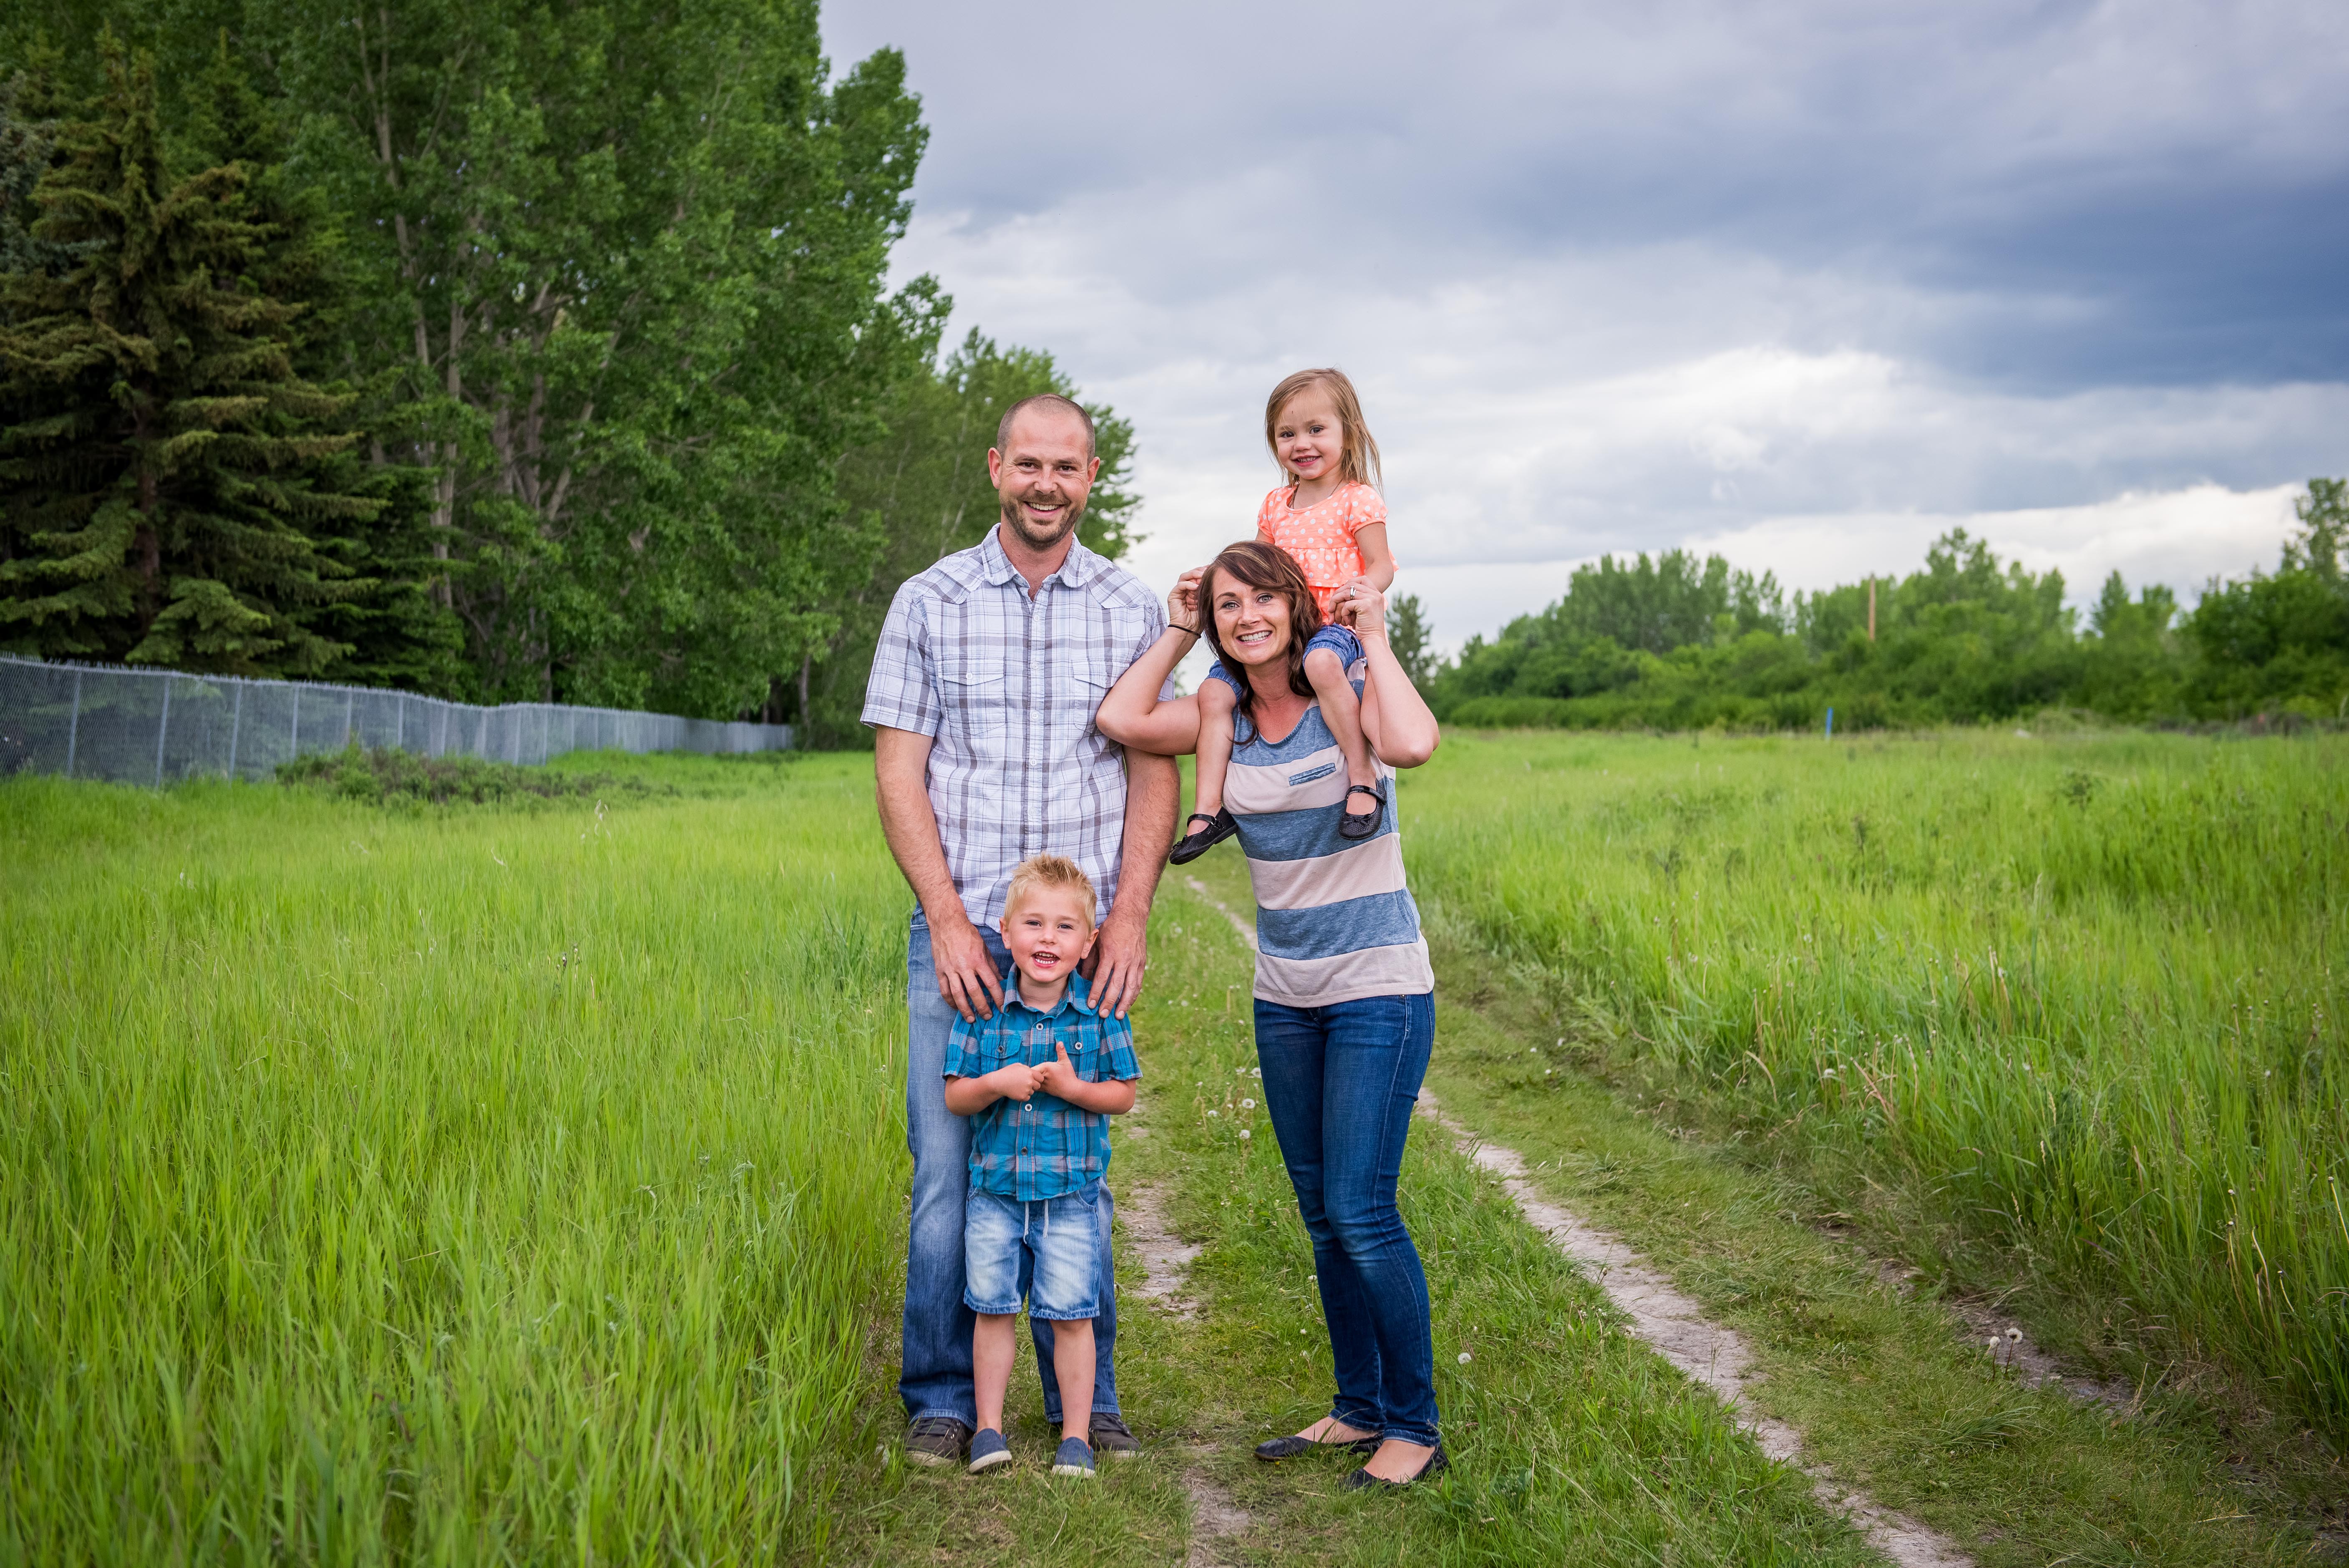 Airdrie Family Photographer